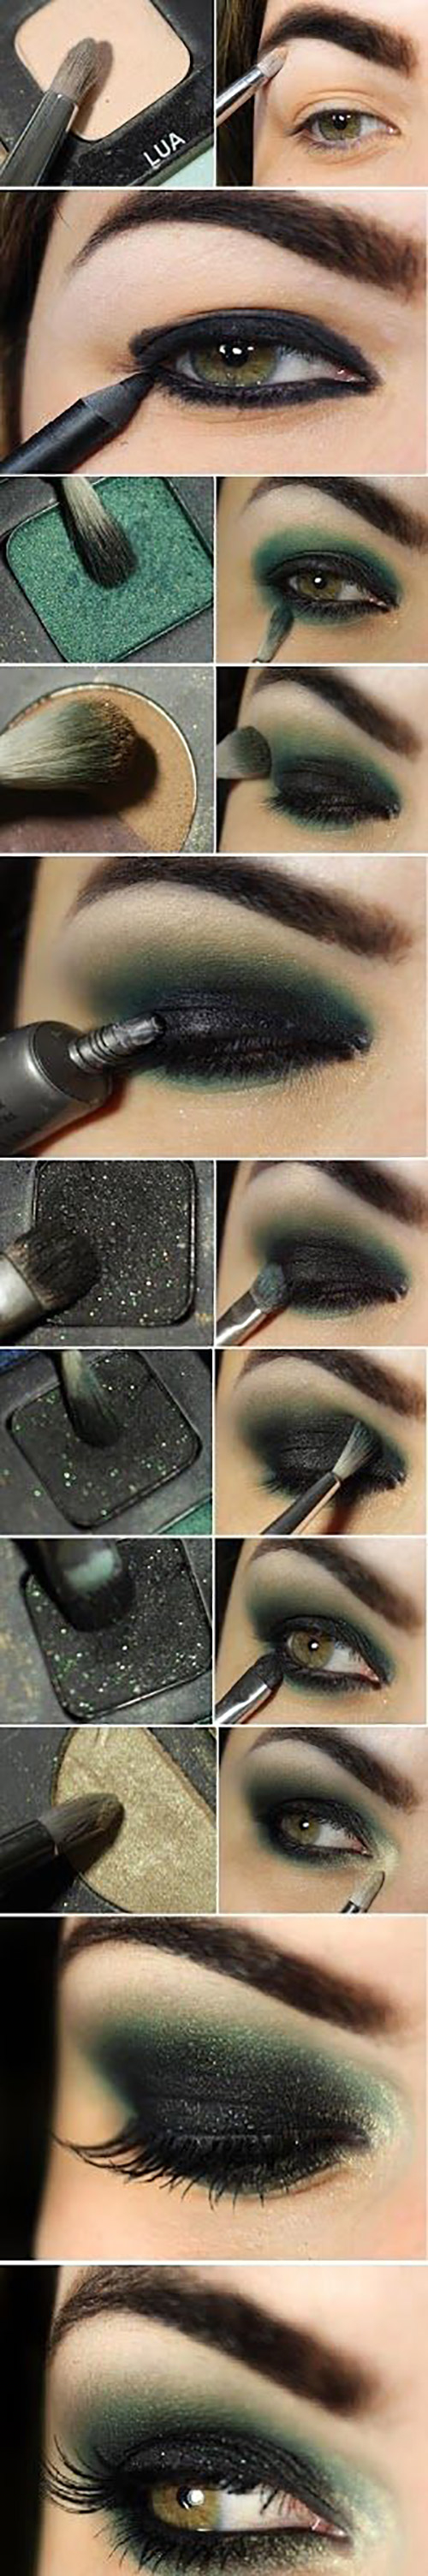 How To Create Smokey Eye Makeup How To Do Smokey Eye Makeup Top 10 Tutorial Pictures For 2019